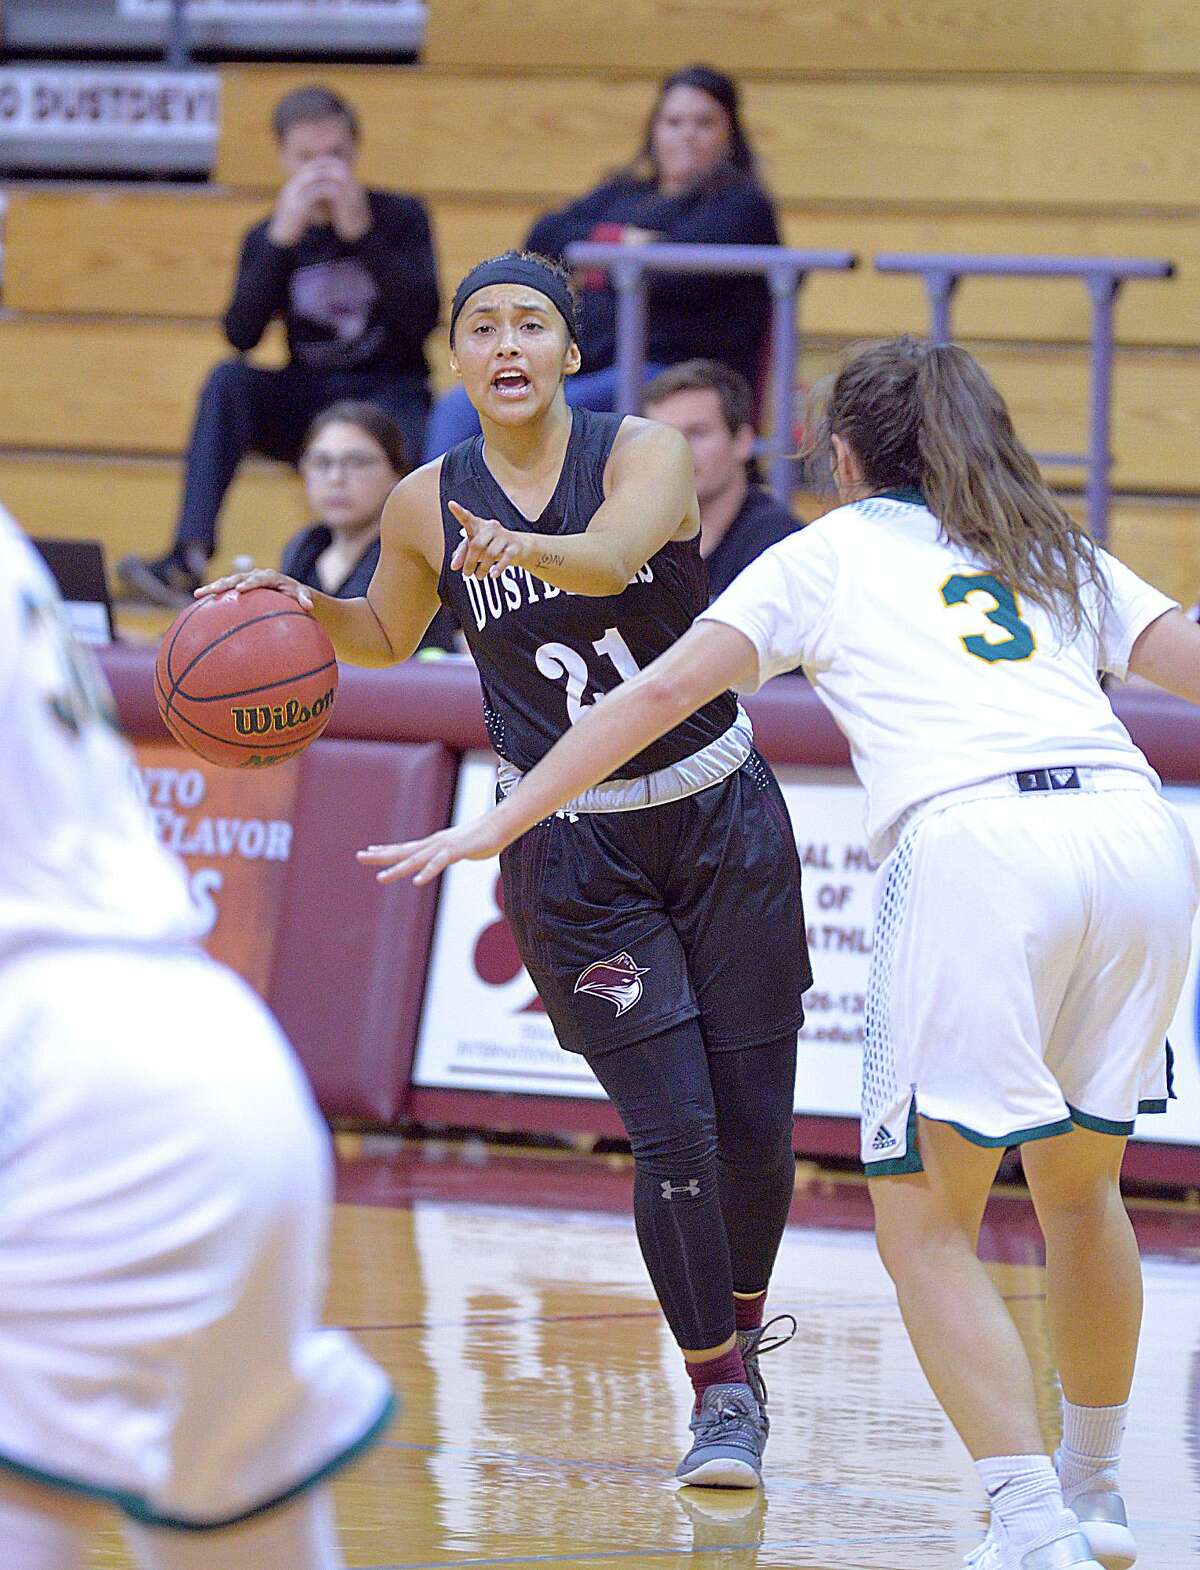 The departure of senior co-captains Ashley Perez, pictured, and Tantashea Giger began a downward spiral leading to a disastrous month of December for the Dustdevils women’s basketball team.